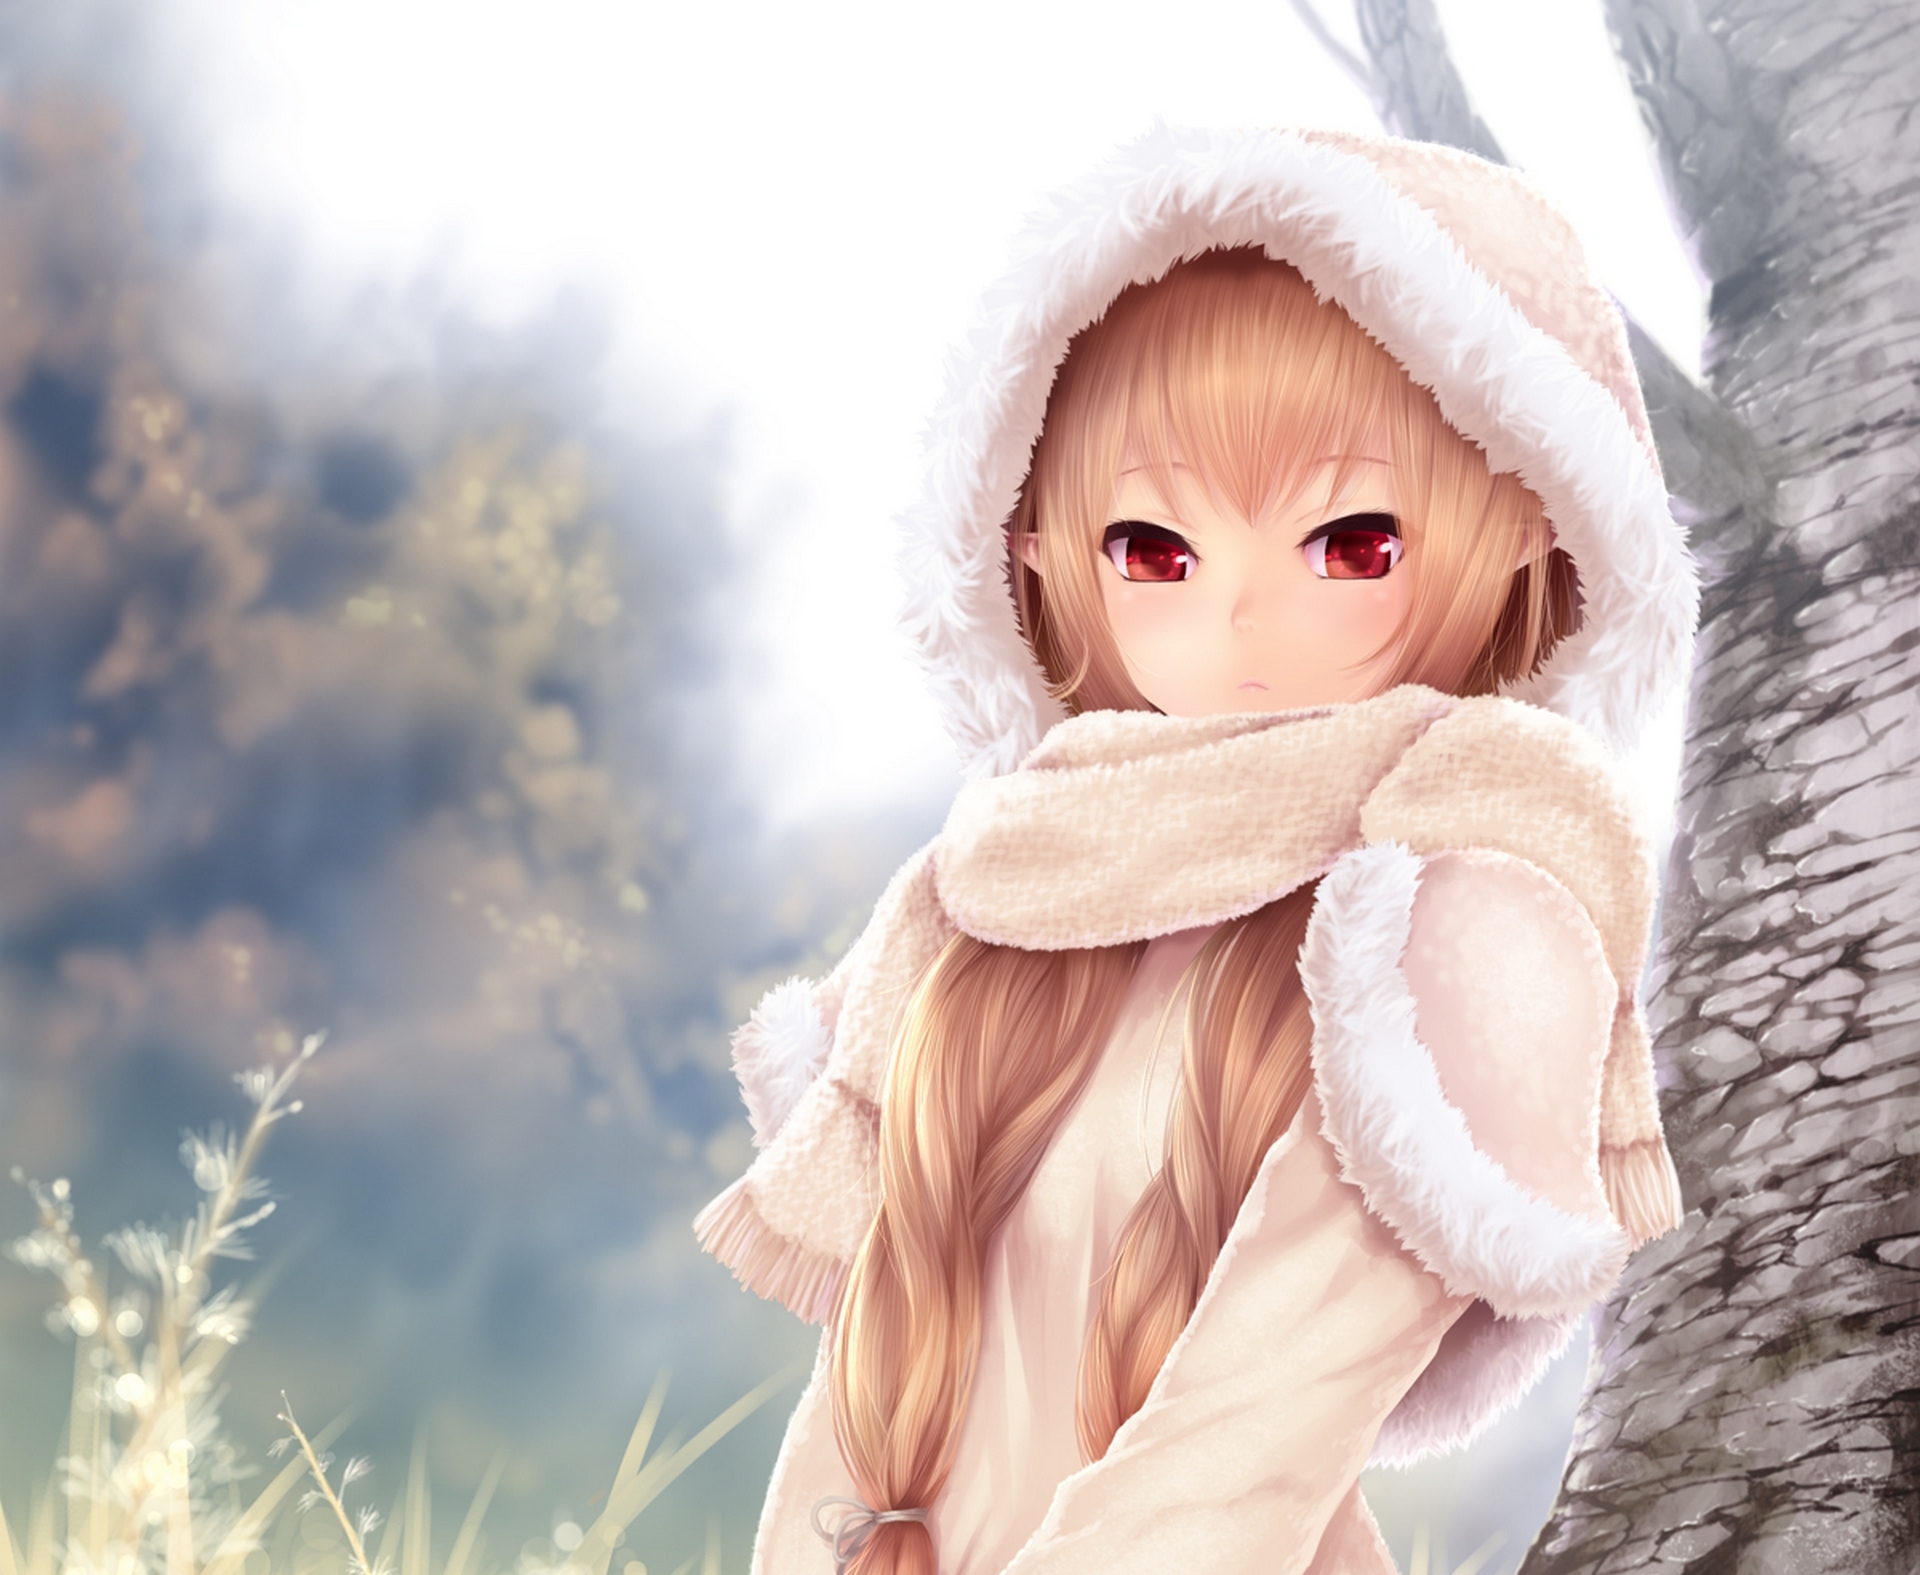 Girl Anime Winter Wallpaper Hd Anime 4k Wallpapers Images And Background Wallpapers Den